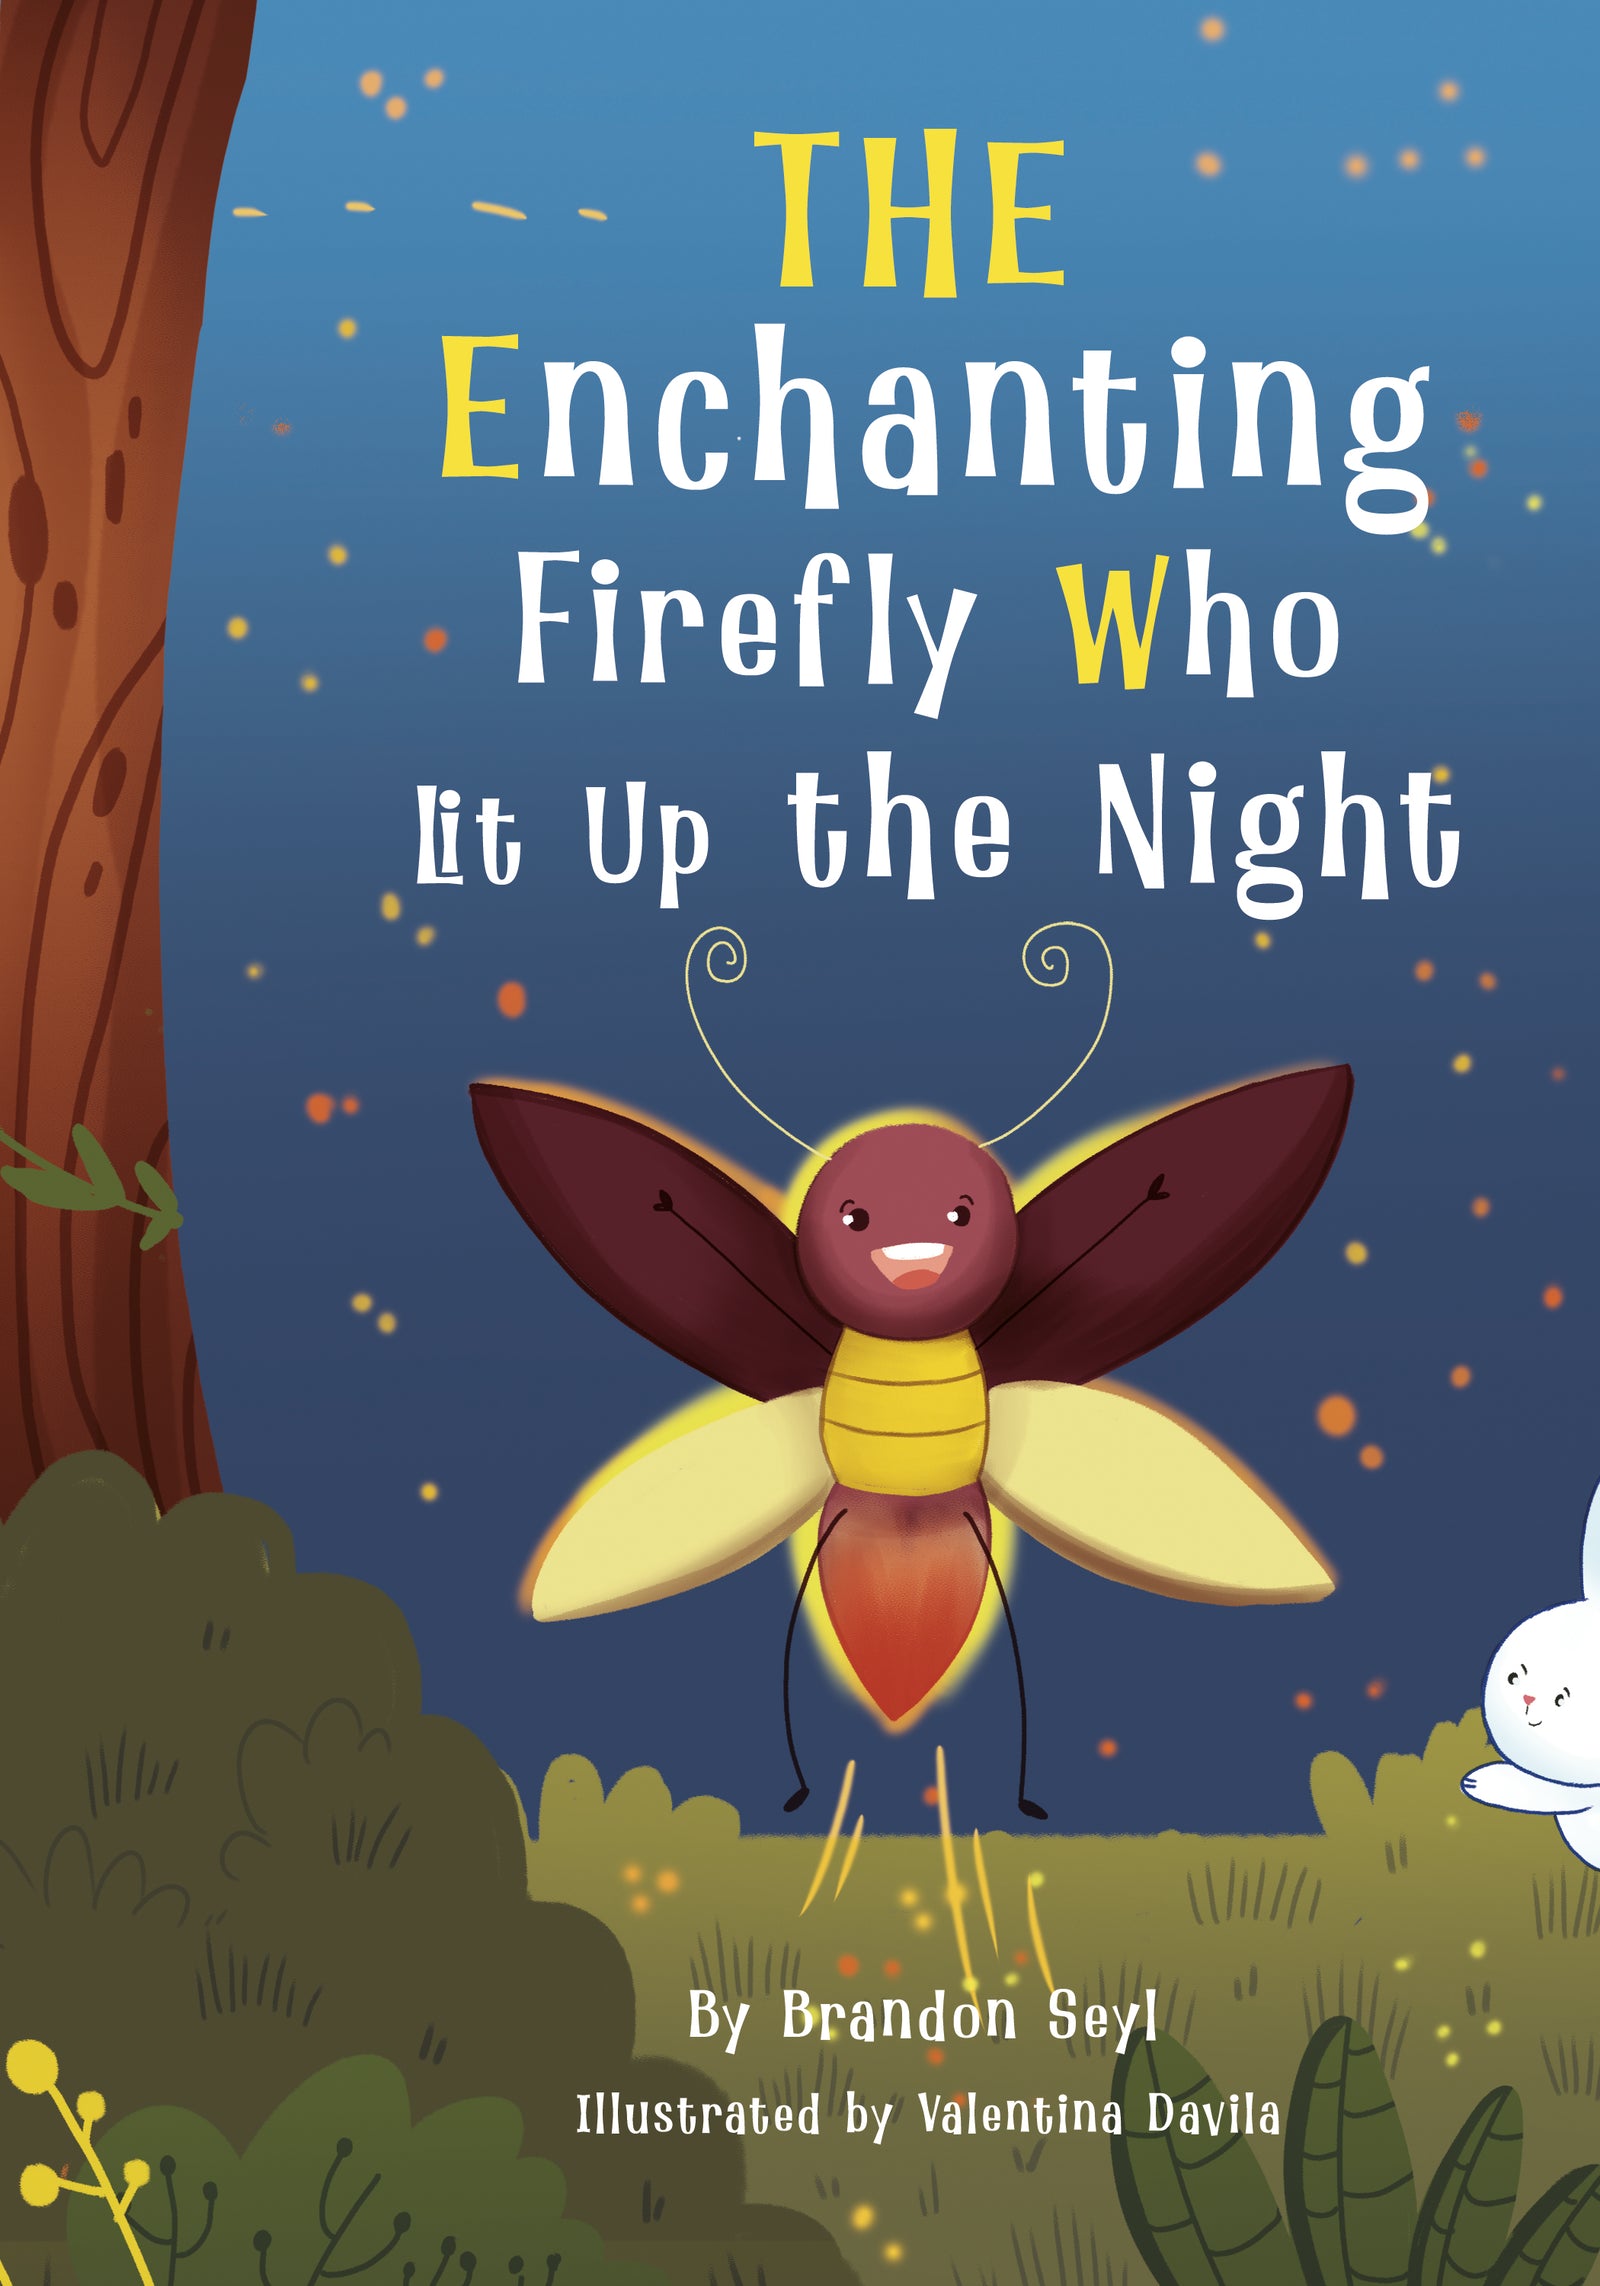 The Enchanting FireFly Who Lit Up the Night